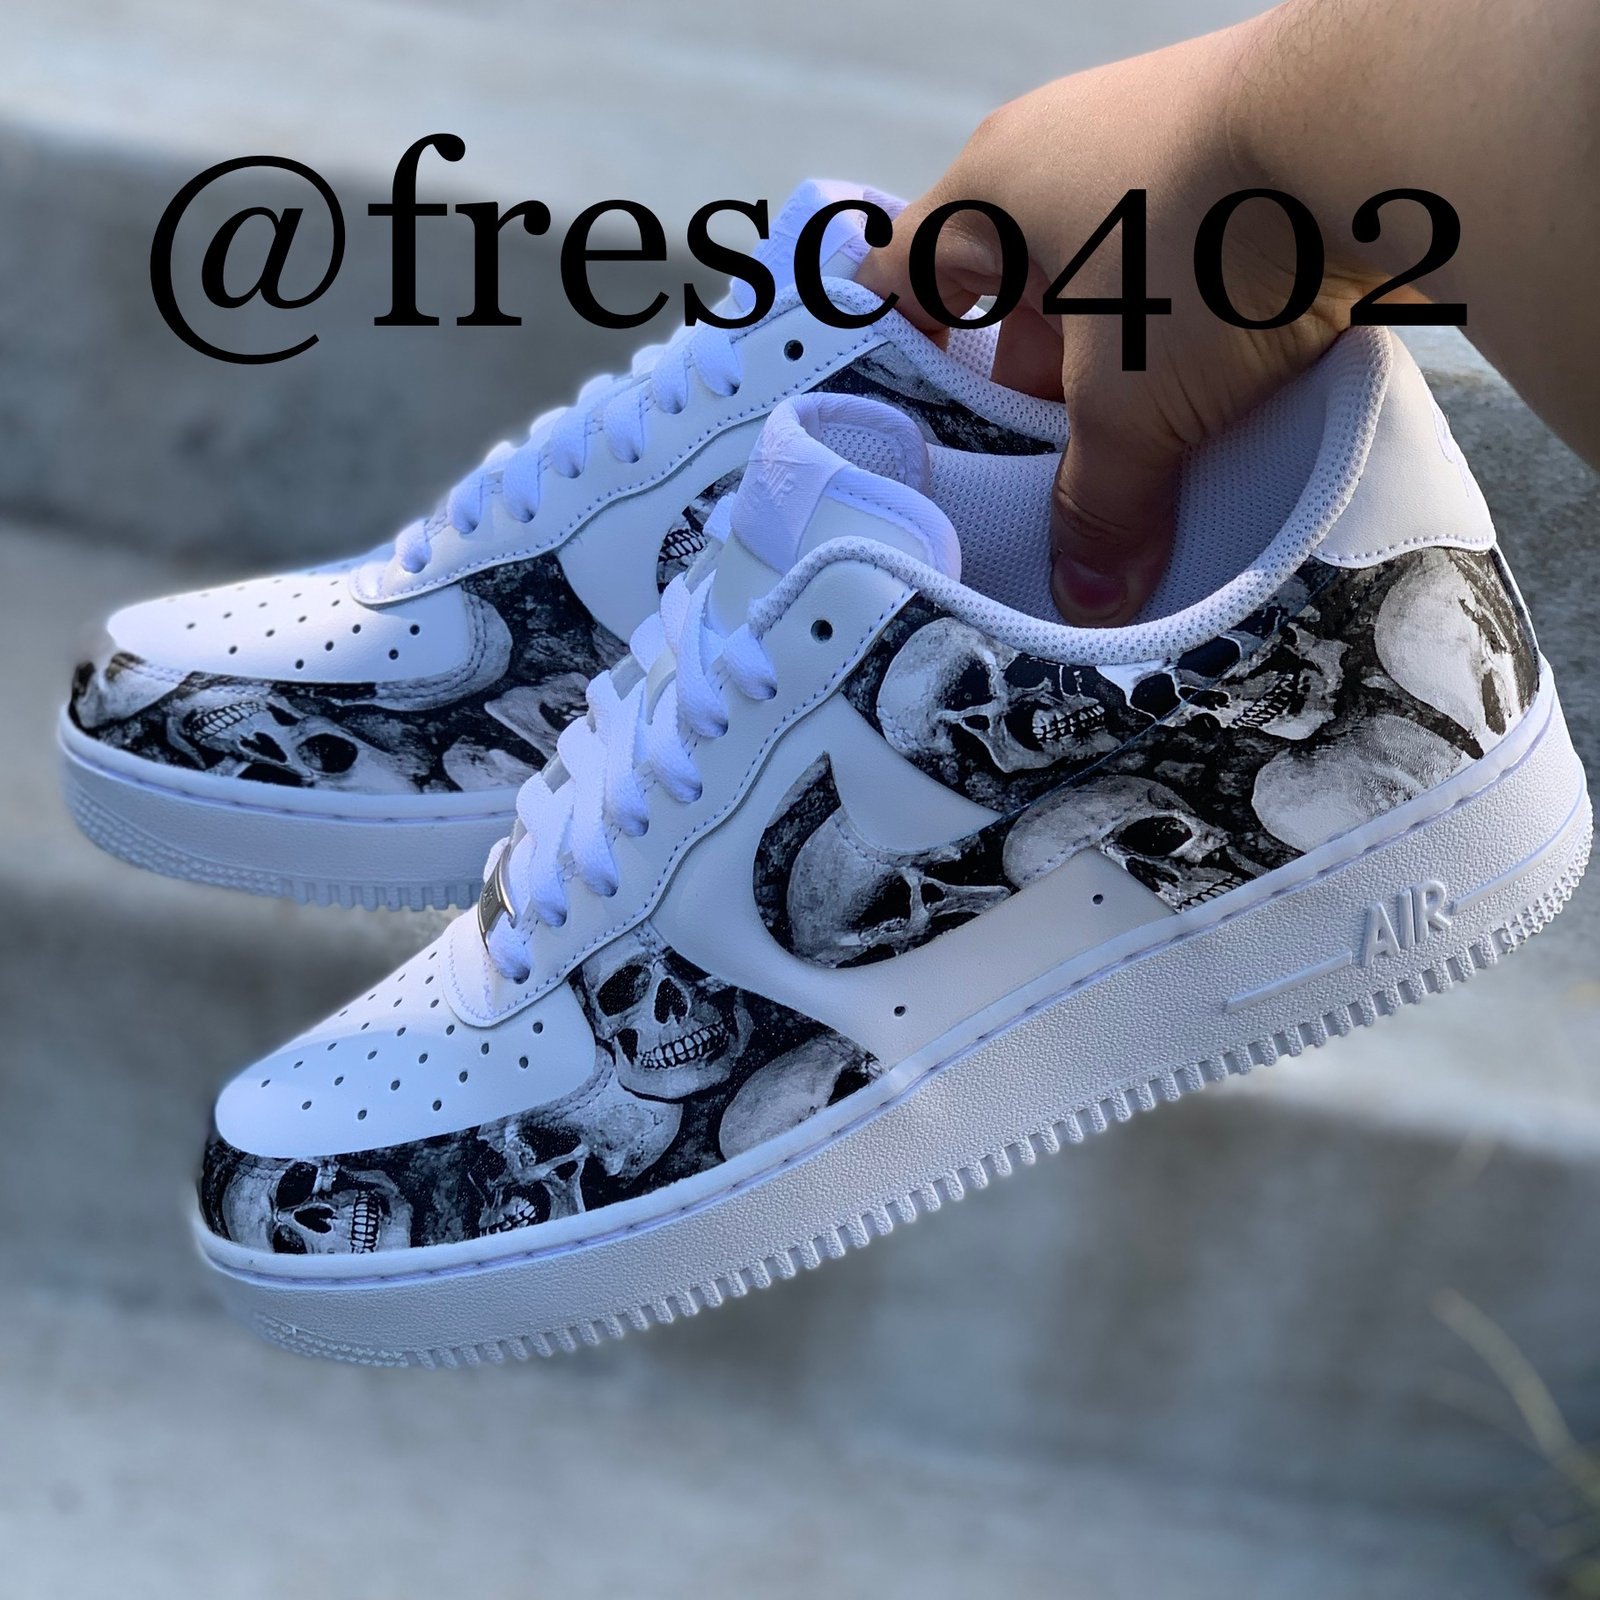 hydro dipping nike air force ones